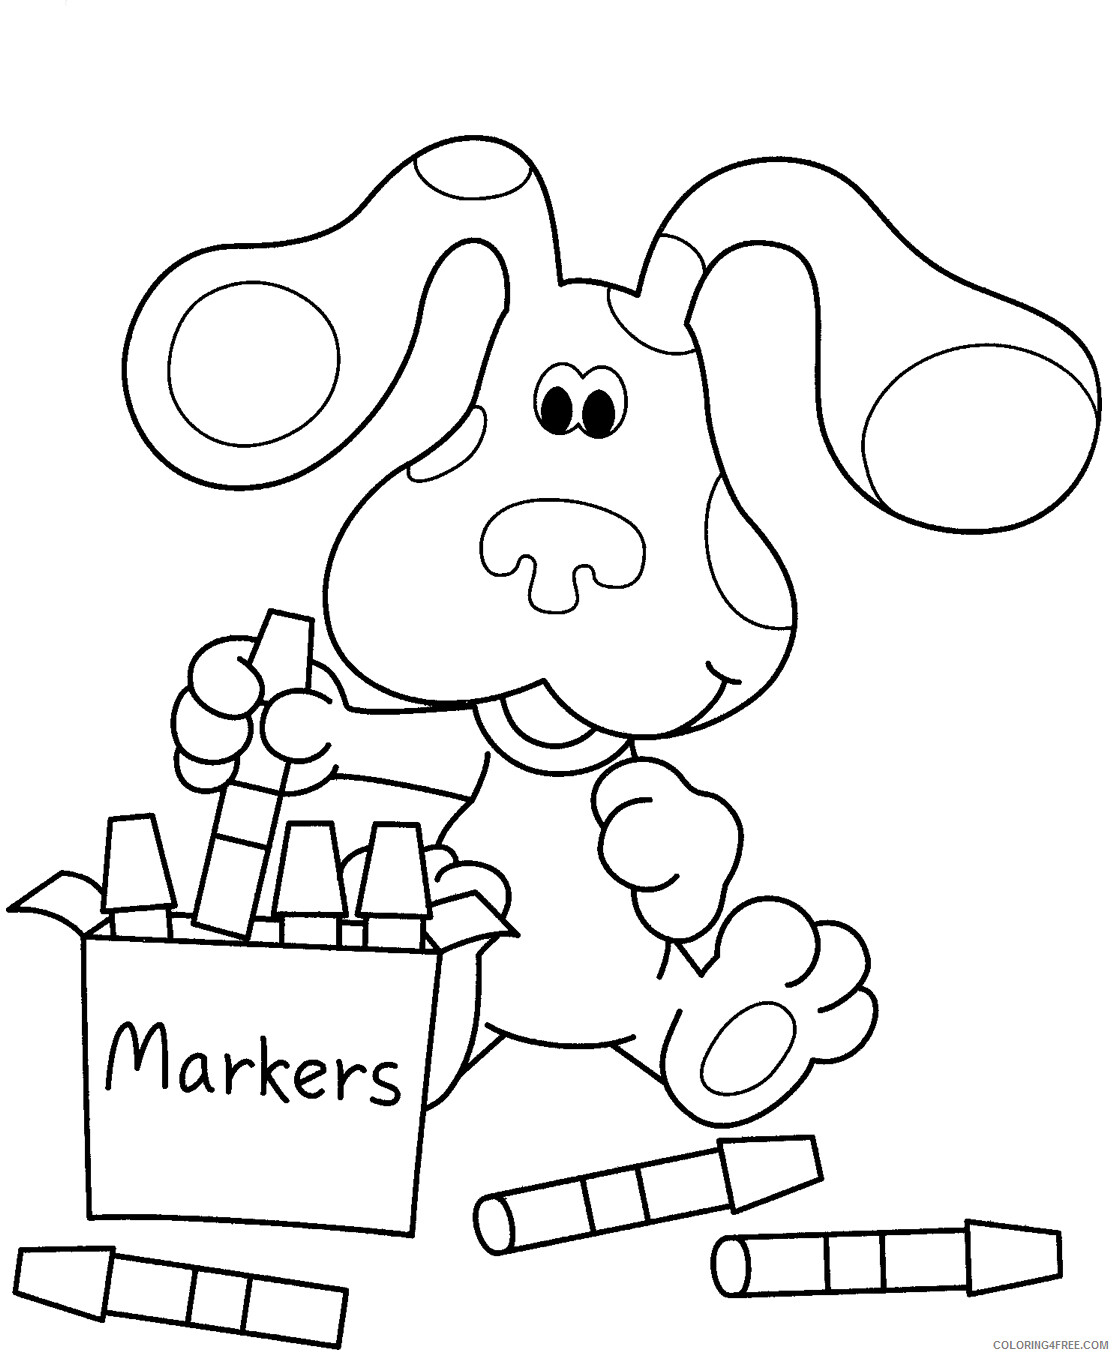 Blues Clues Coloring Pages TV Film Blues Clues Printable 2020 00889 Coloring4free